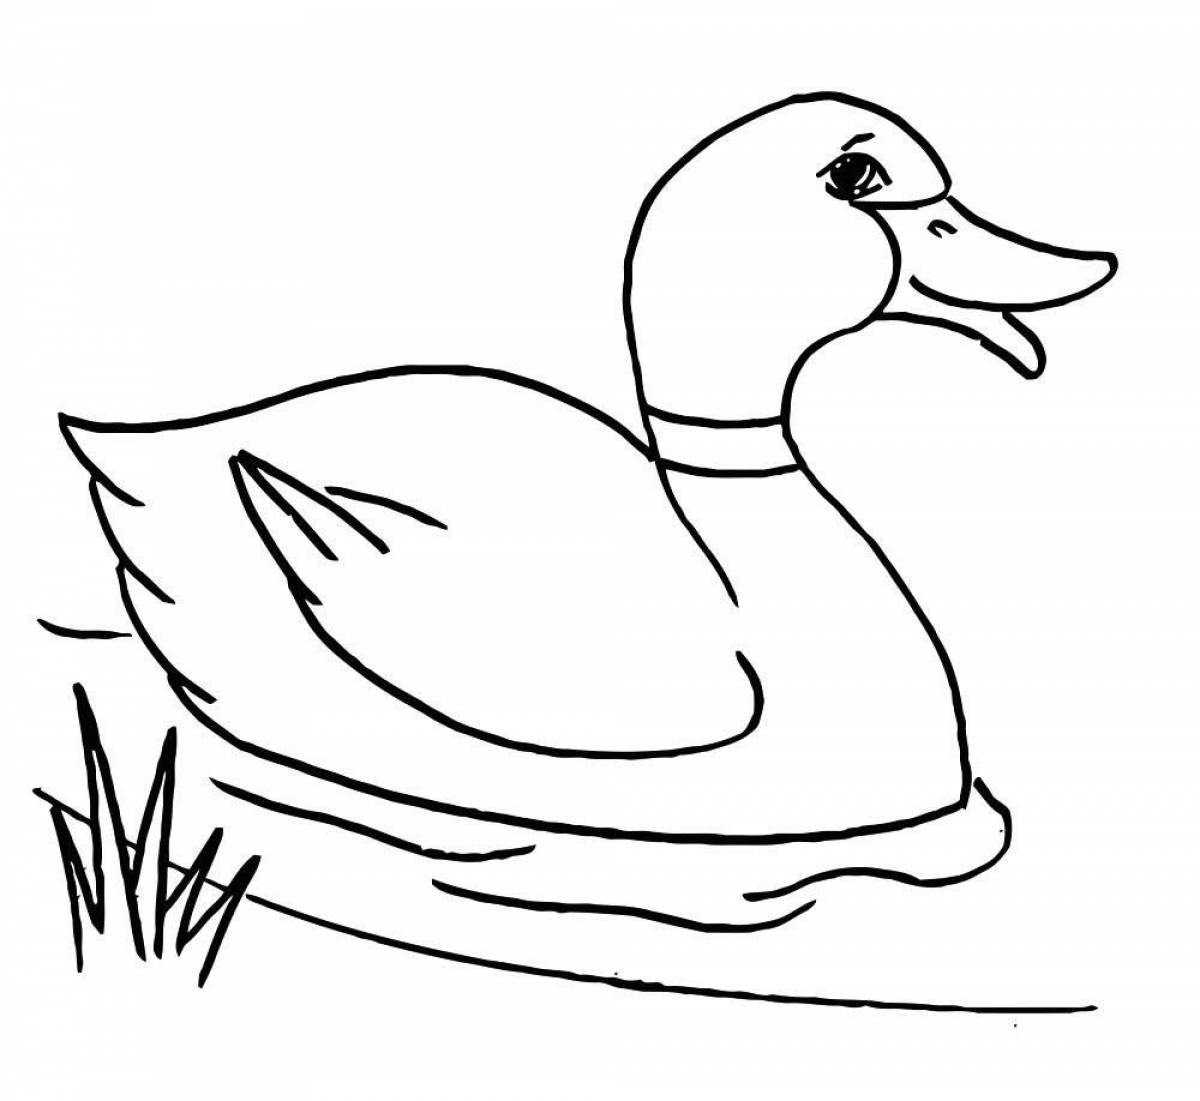 Colorful duck coloring book for kids